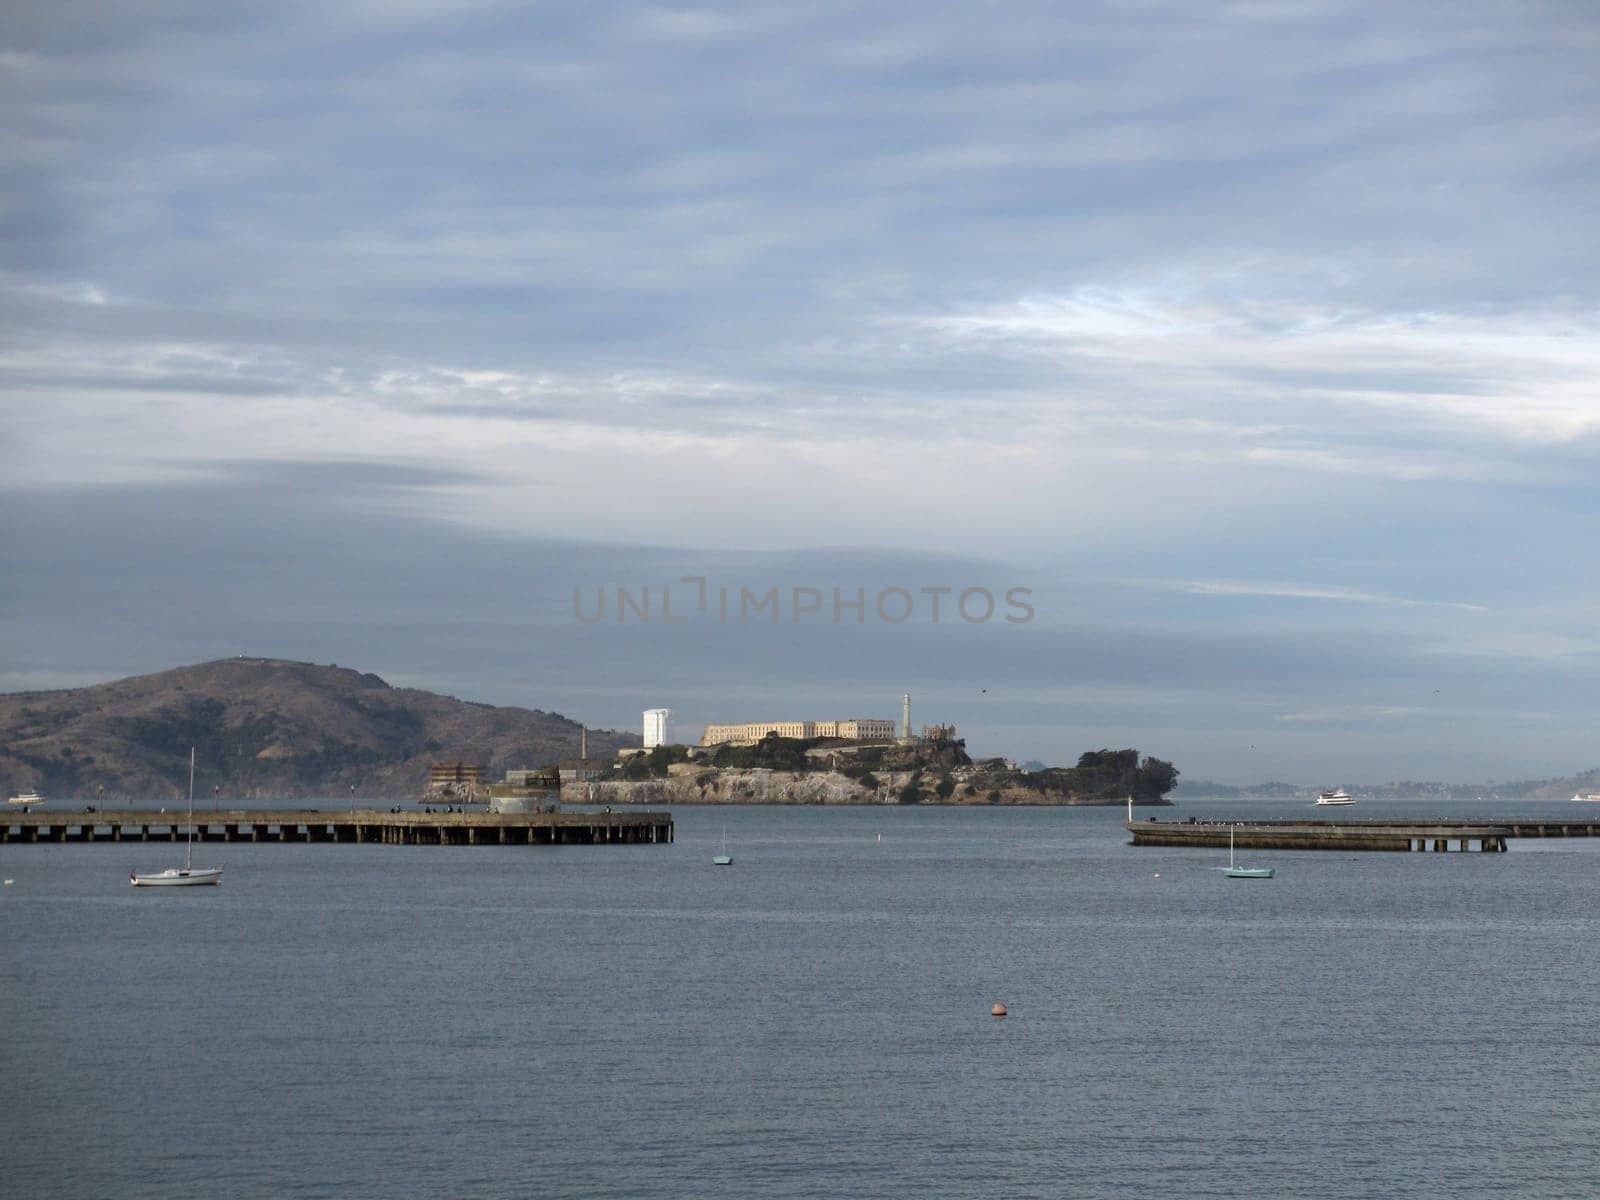 Pier and Boats with Alcatraz View by EricGBVD